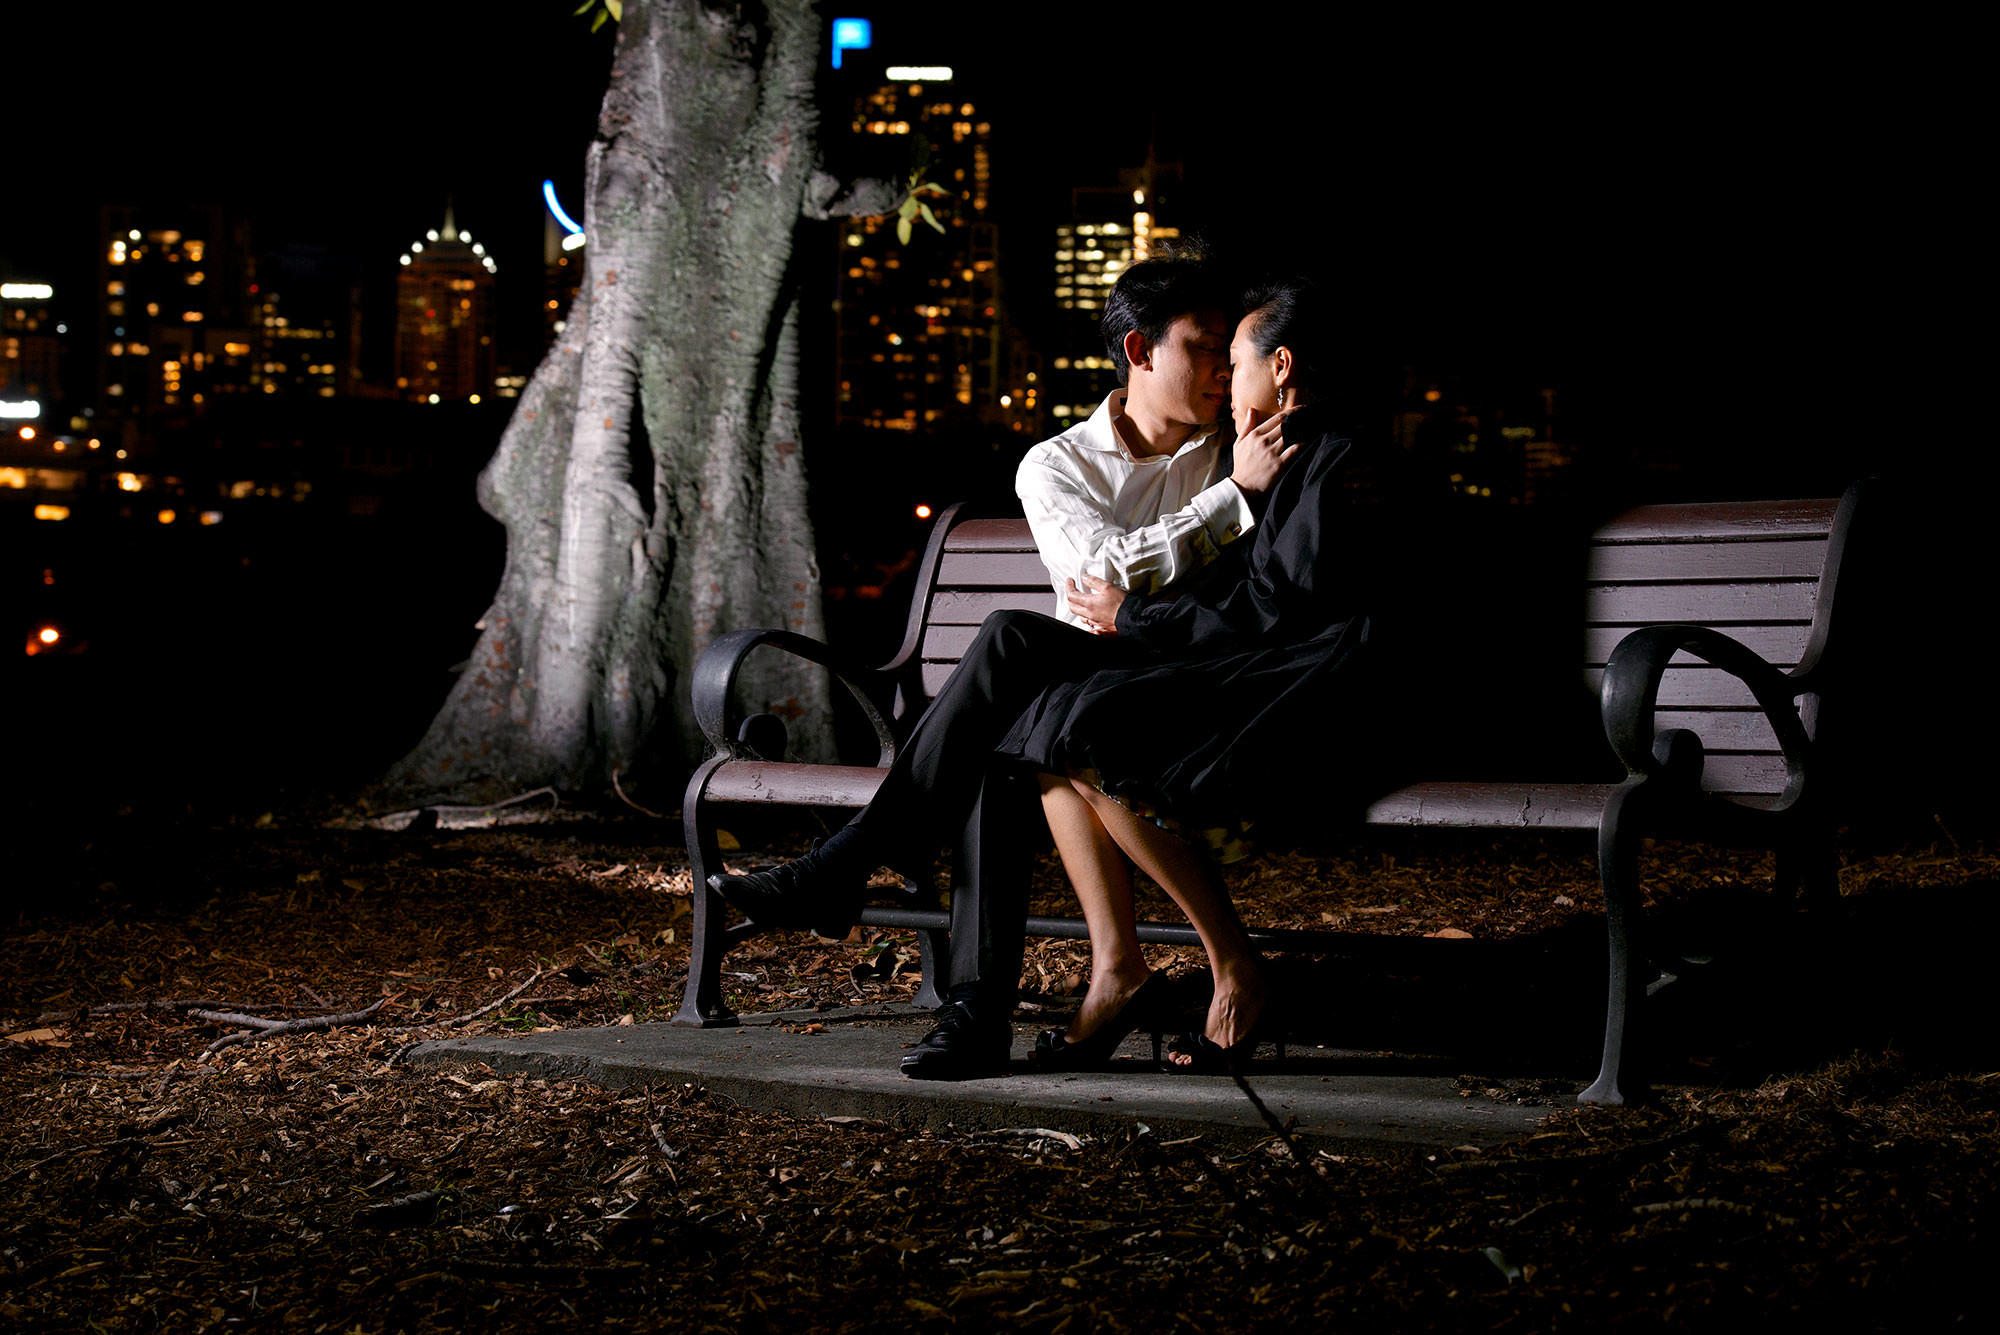 Kissing on bench in the dark